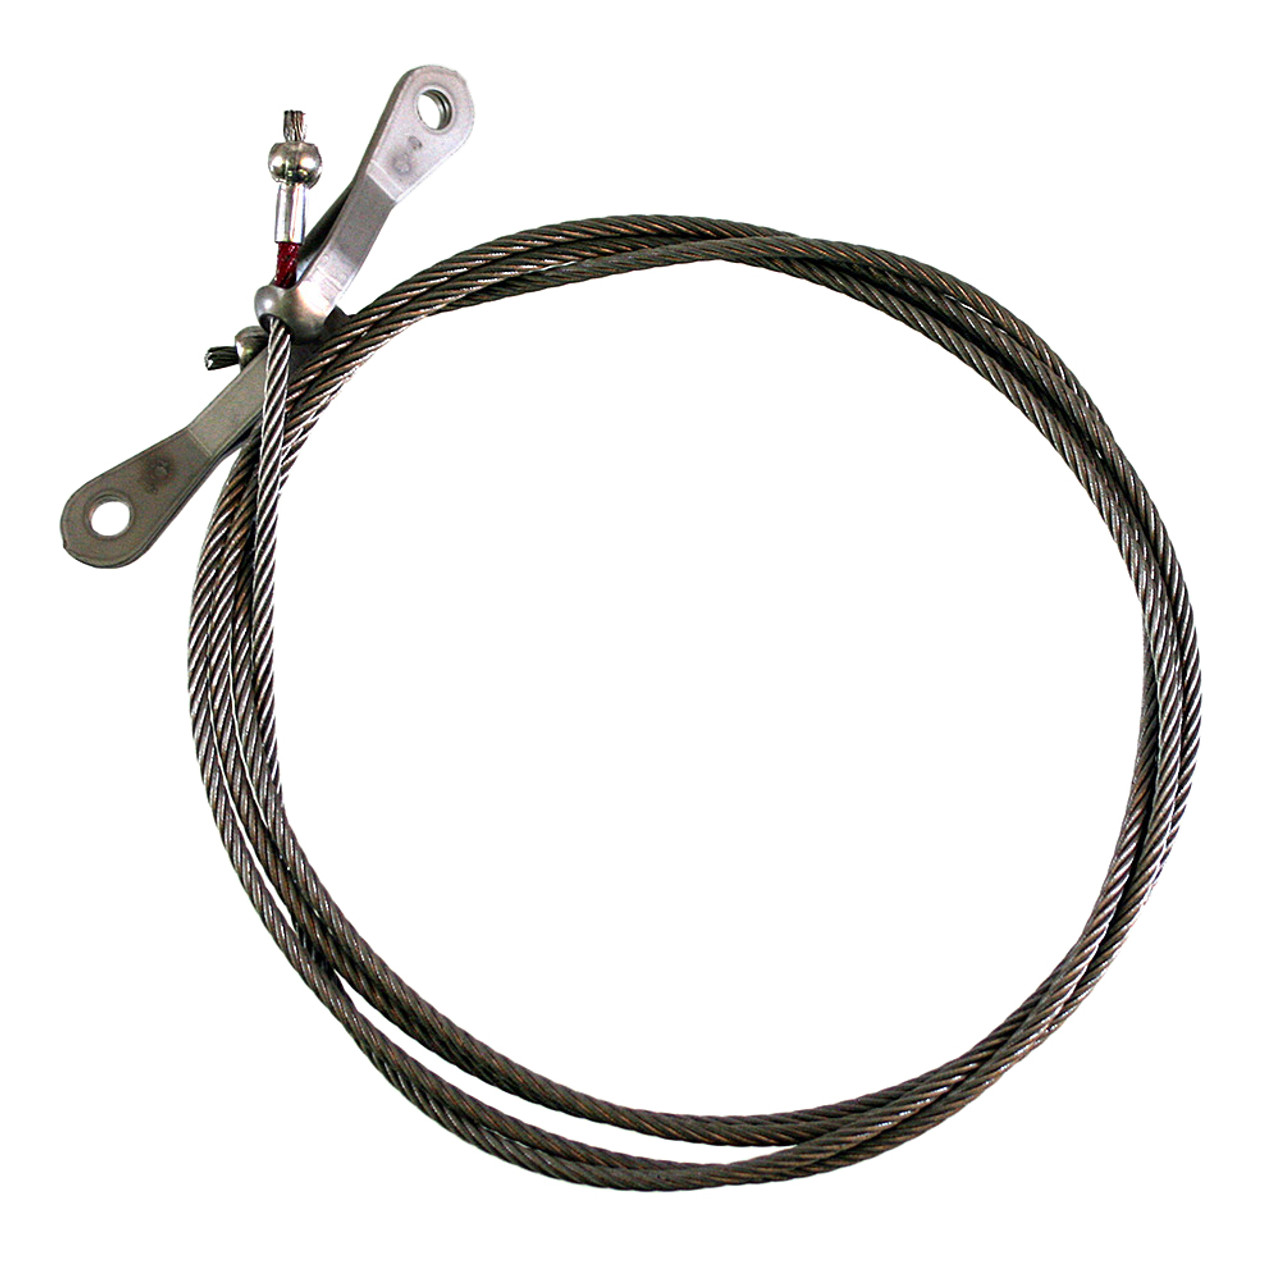 U0510105-323   UNIVAIR TAILWHEEL STEERING CABLE - FITS CESSNA